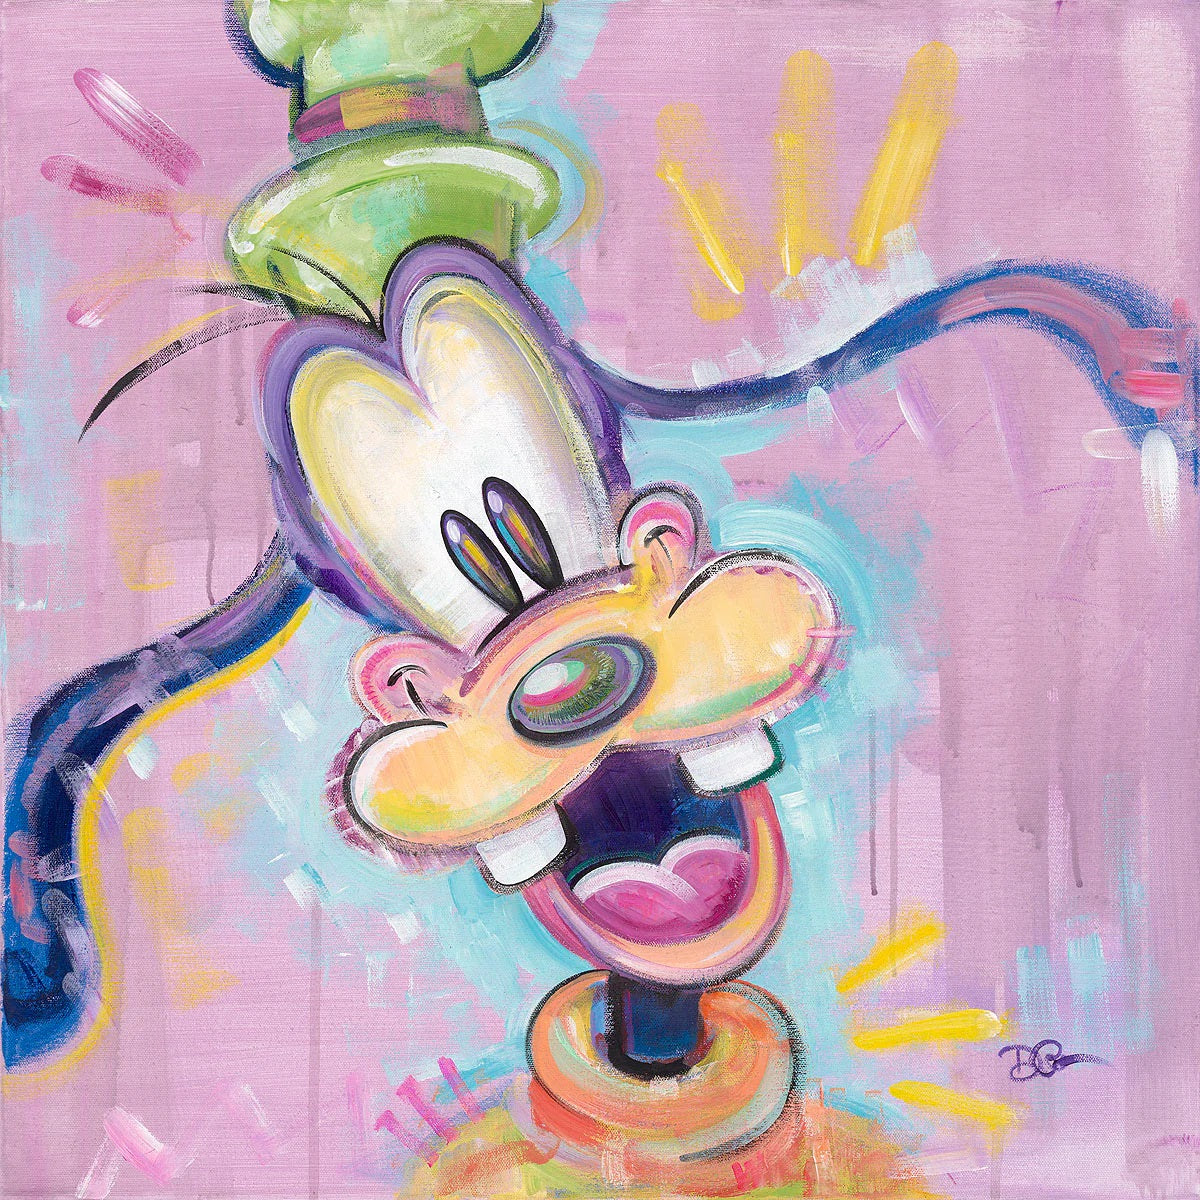 Goofy just being himself...as usual!